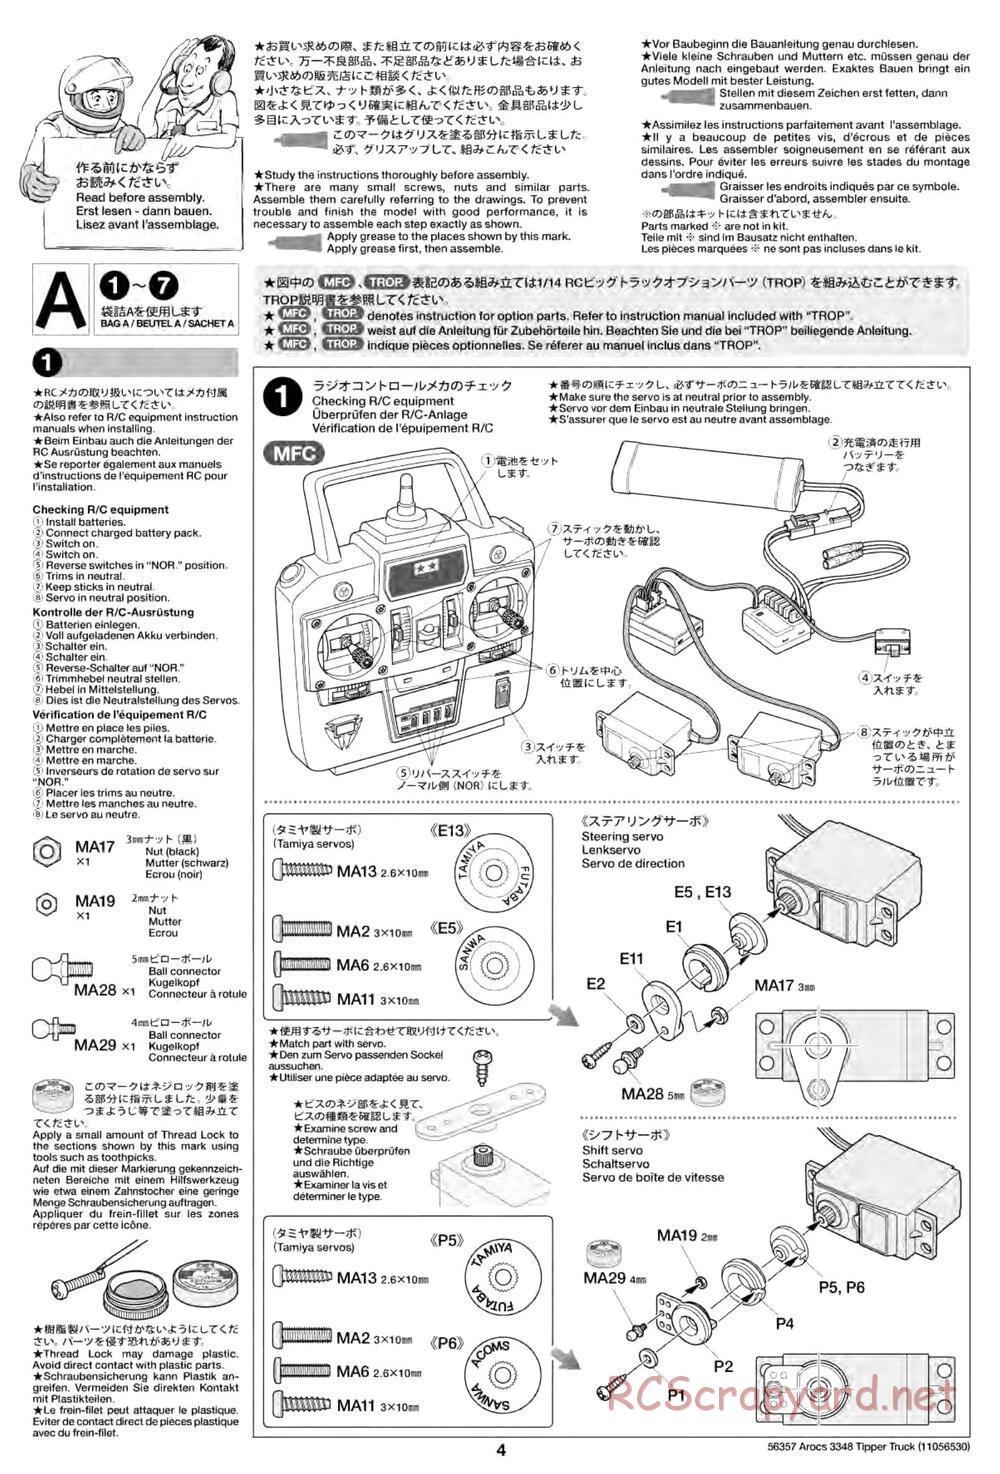 Tamiya - Mercedes-Benz Arocs 3348 6x4 Tipper Truck Chassis - Manual - Page 4